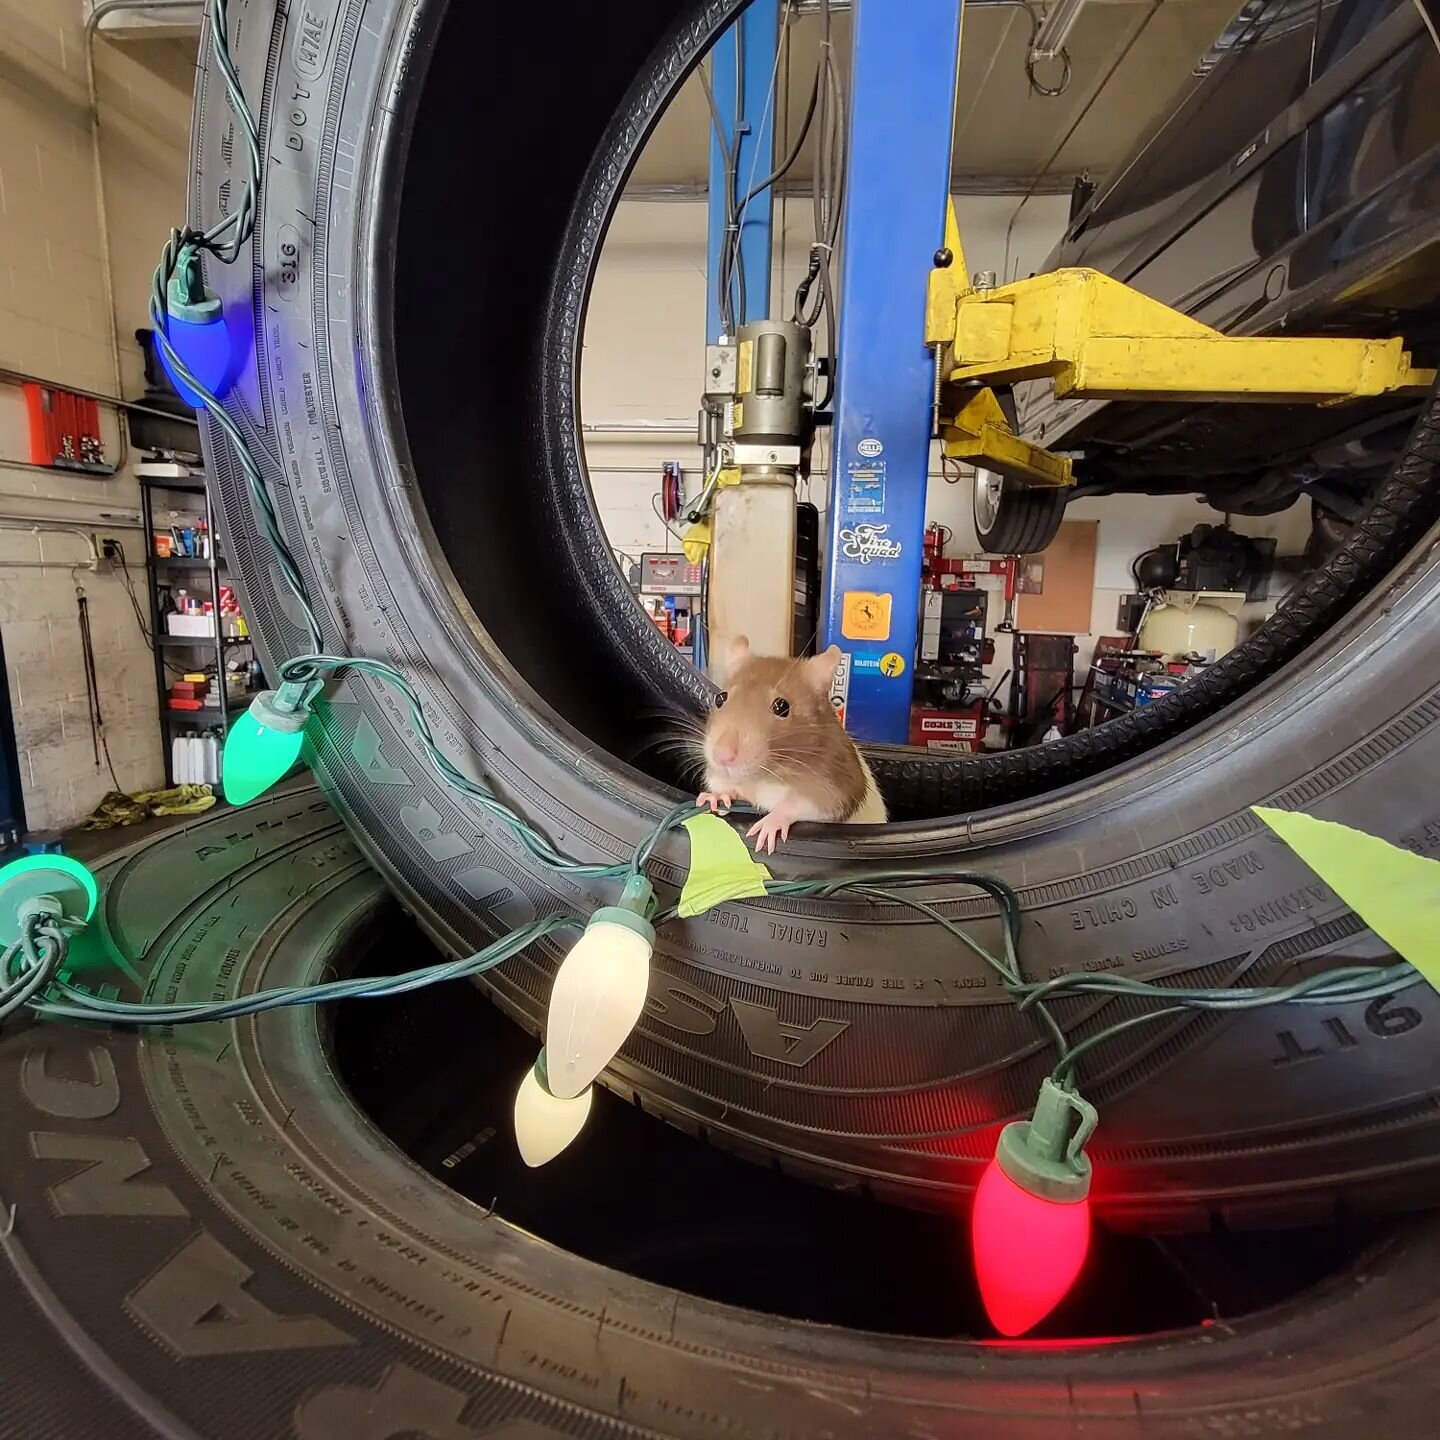 Lavender is our new tech at the shop and she says &quot;Happy Holidays from Tire Squad! 🥺🥺🥺&quot; 
.
.
.
#tiresquad #tiresquadwestminster #happyholidays